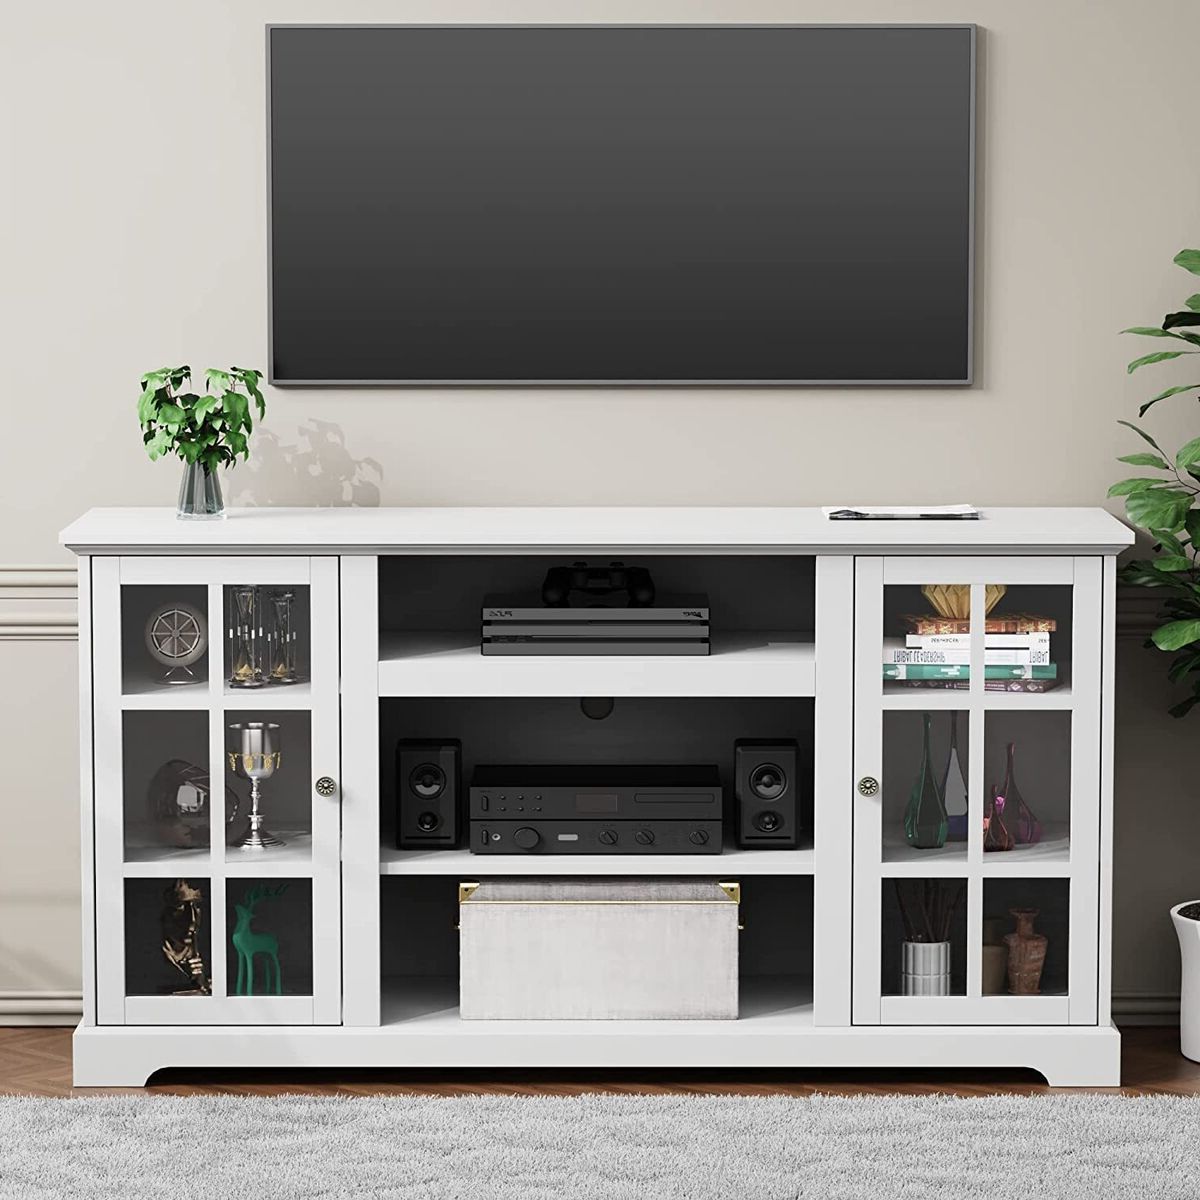 Farmhouse Tv Stand For Tv's Up To 65" Entertainment Center W/ Storage  Shelves | Ebay Intended For Farmhouse Stands For Tvs (Gallery 9 of 20)